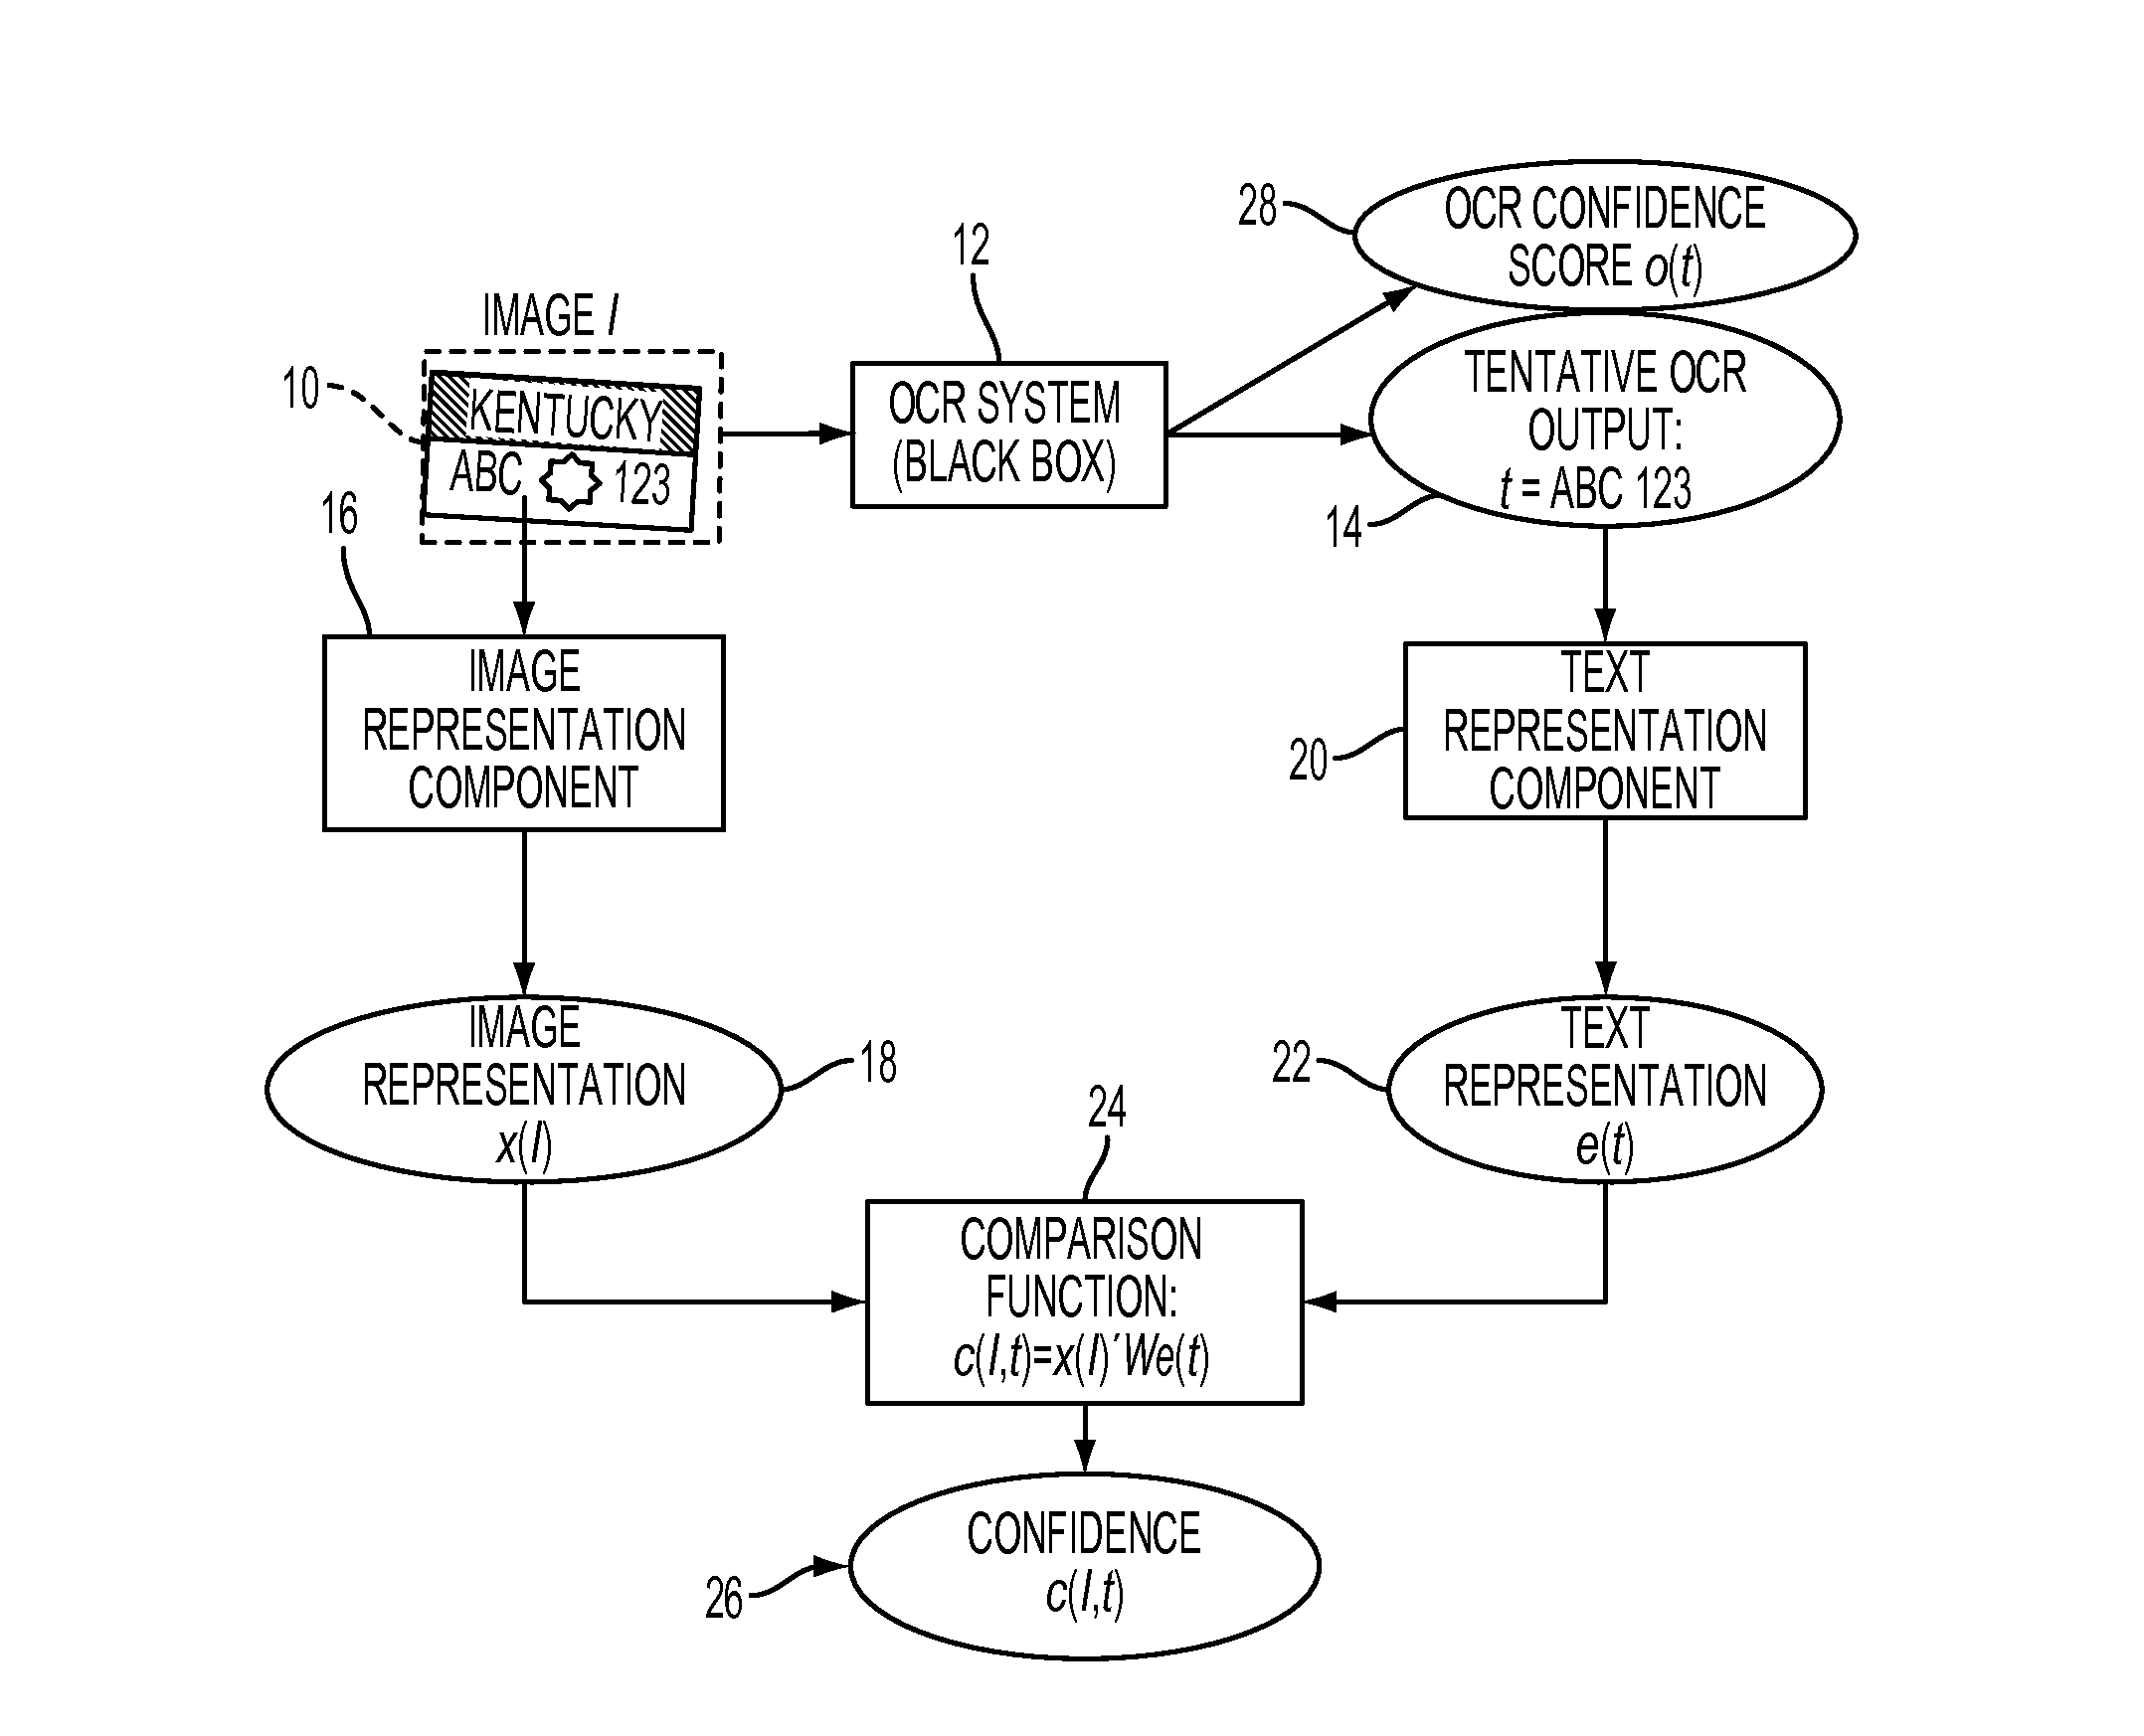 System and method for OCR output verification